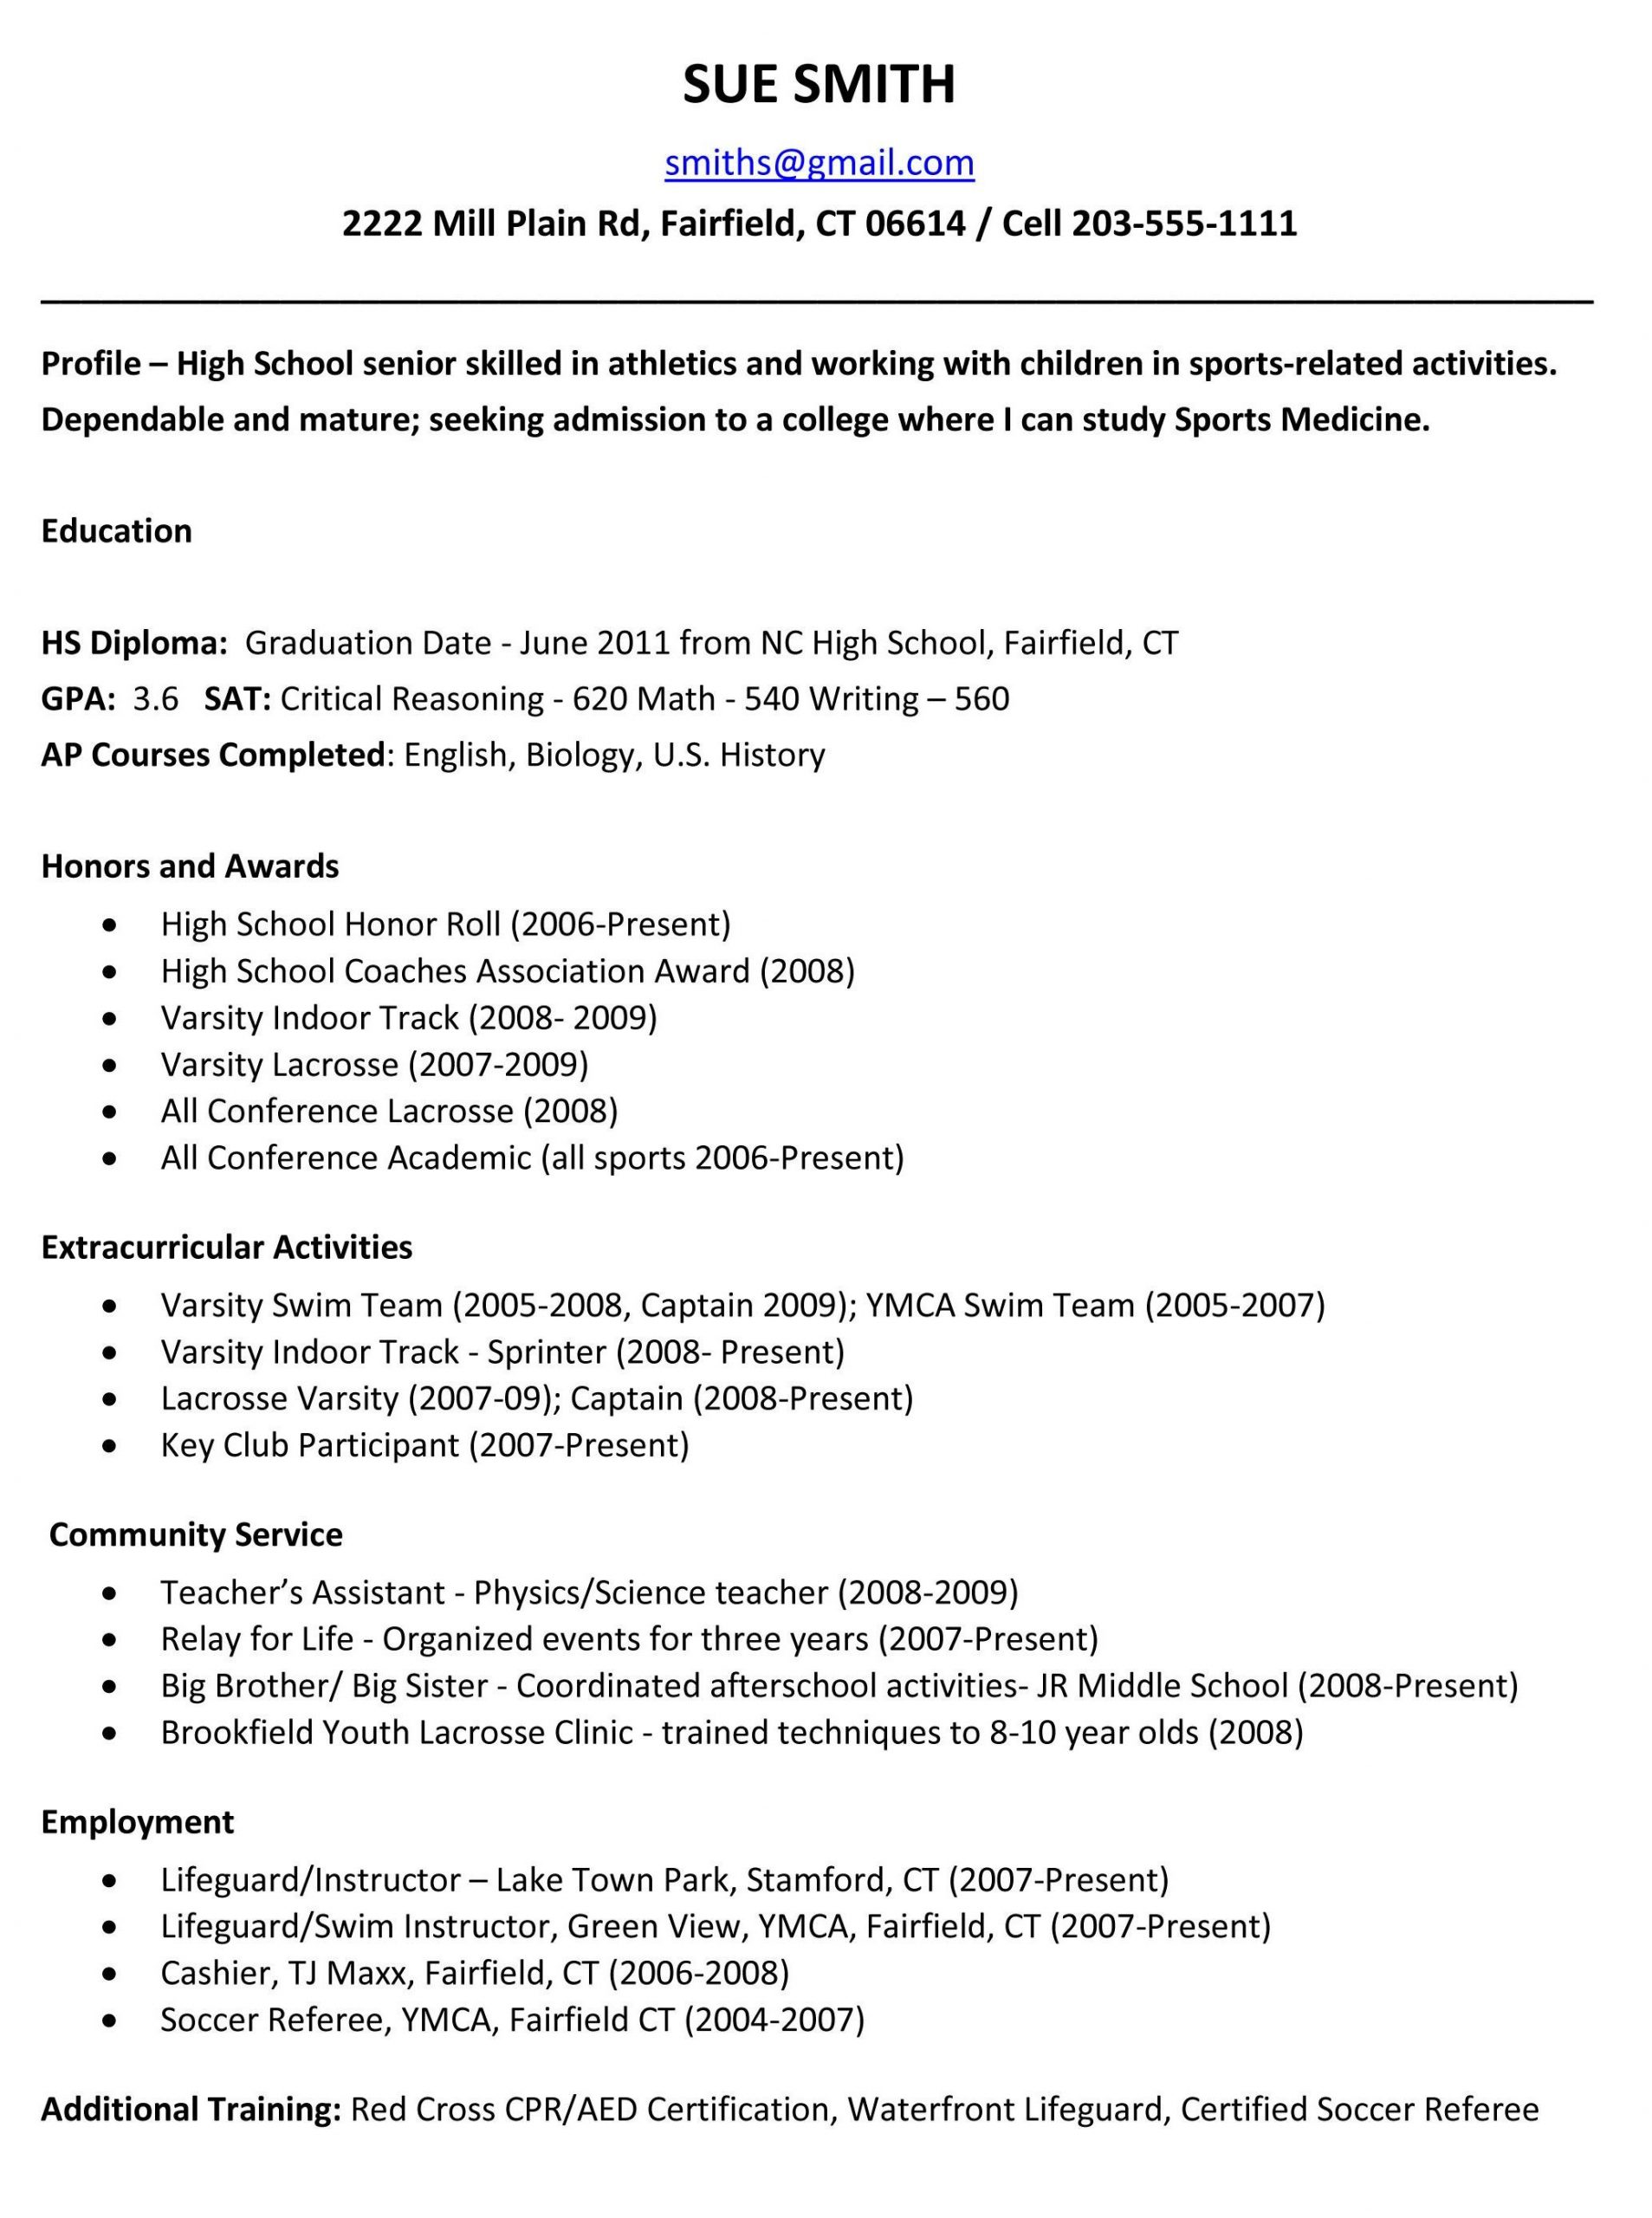 Sample High School Student Resume for College Application Sample High School Resume for College App – High School Resume …